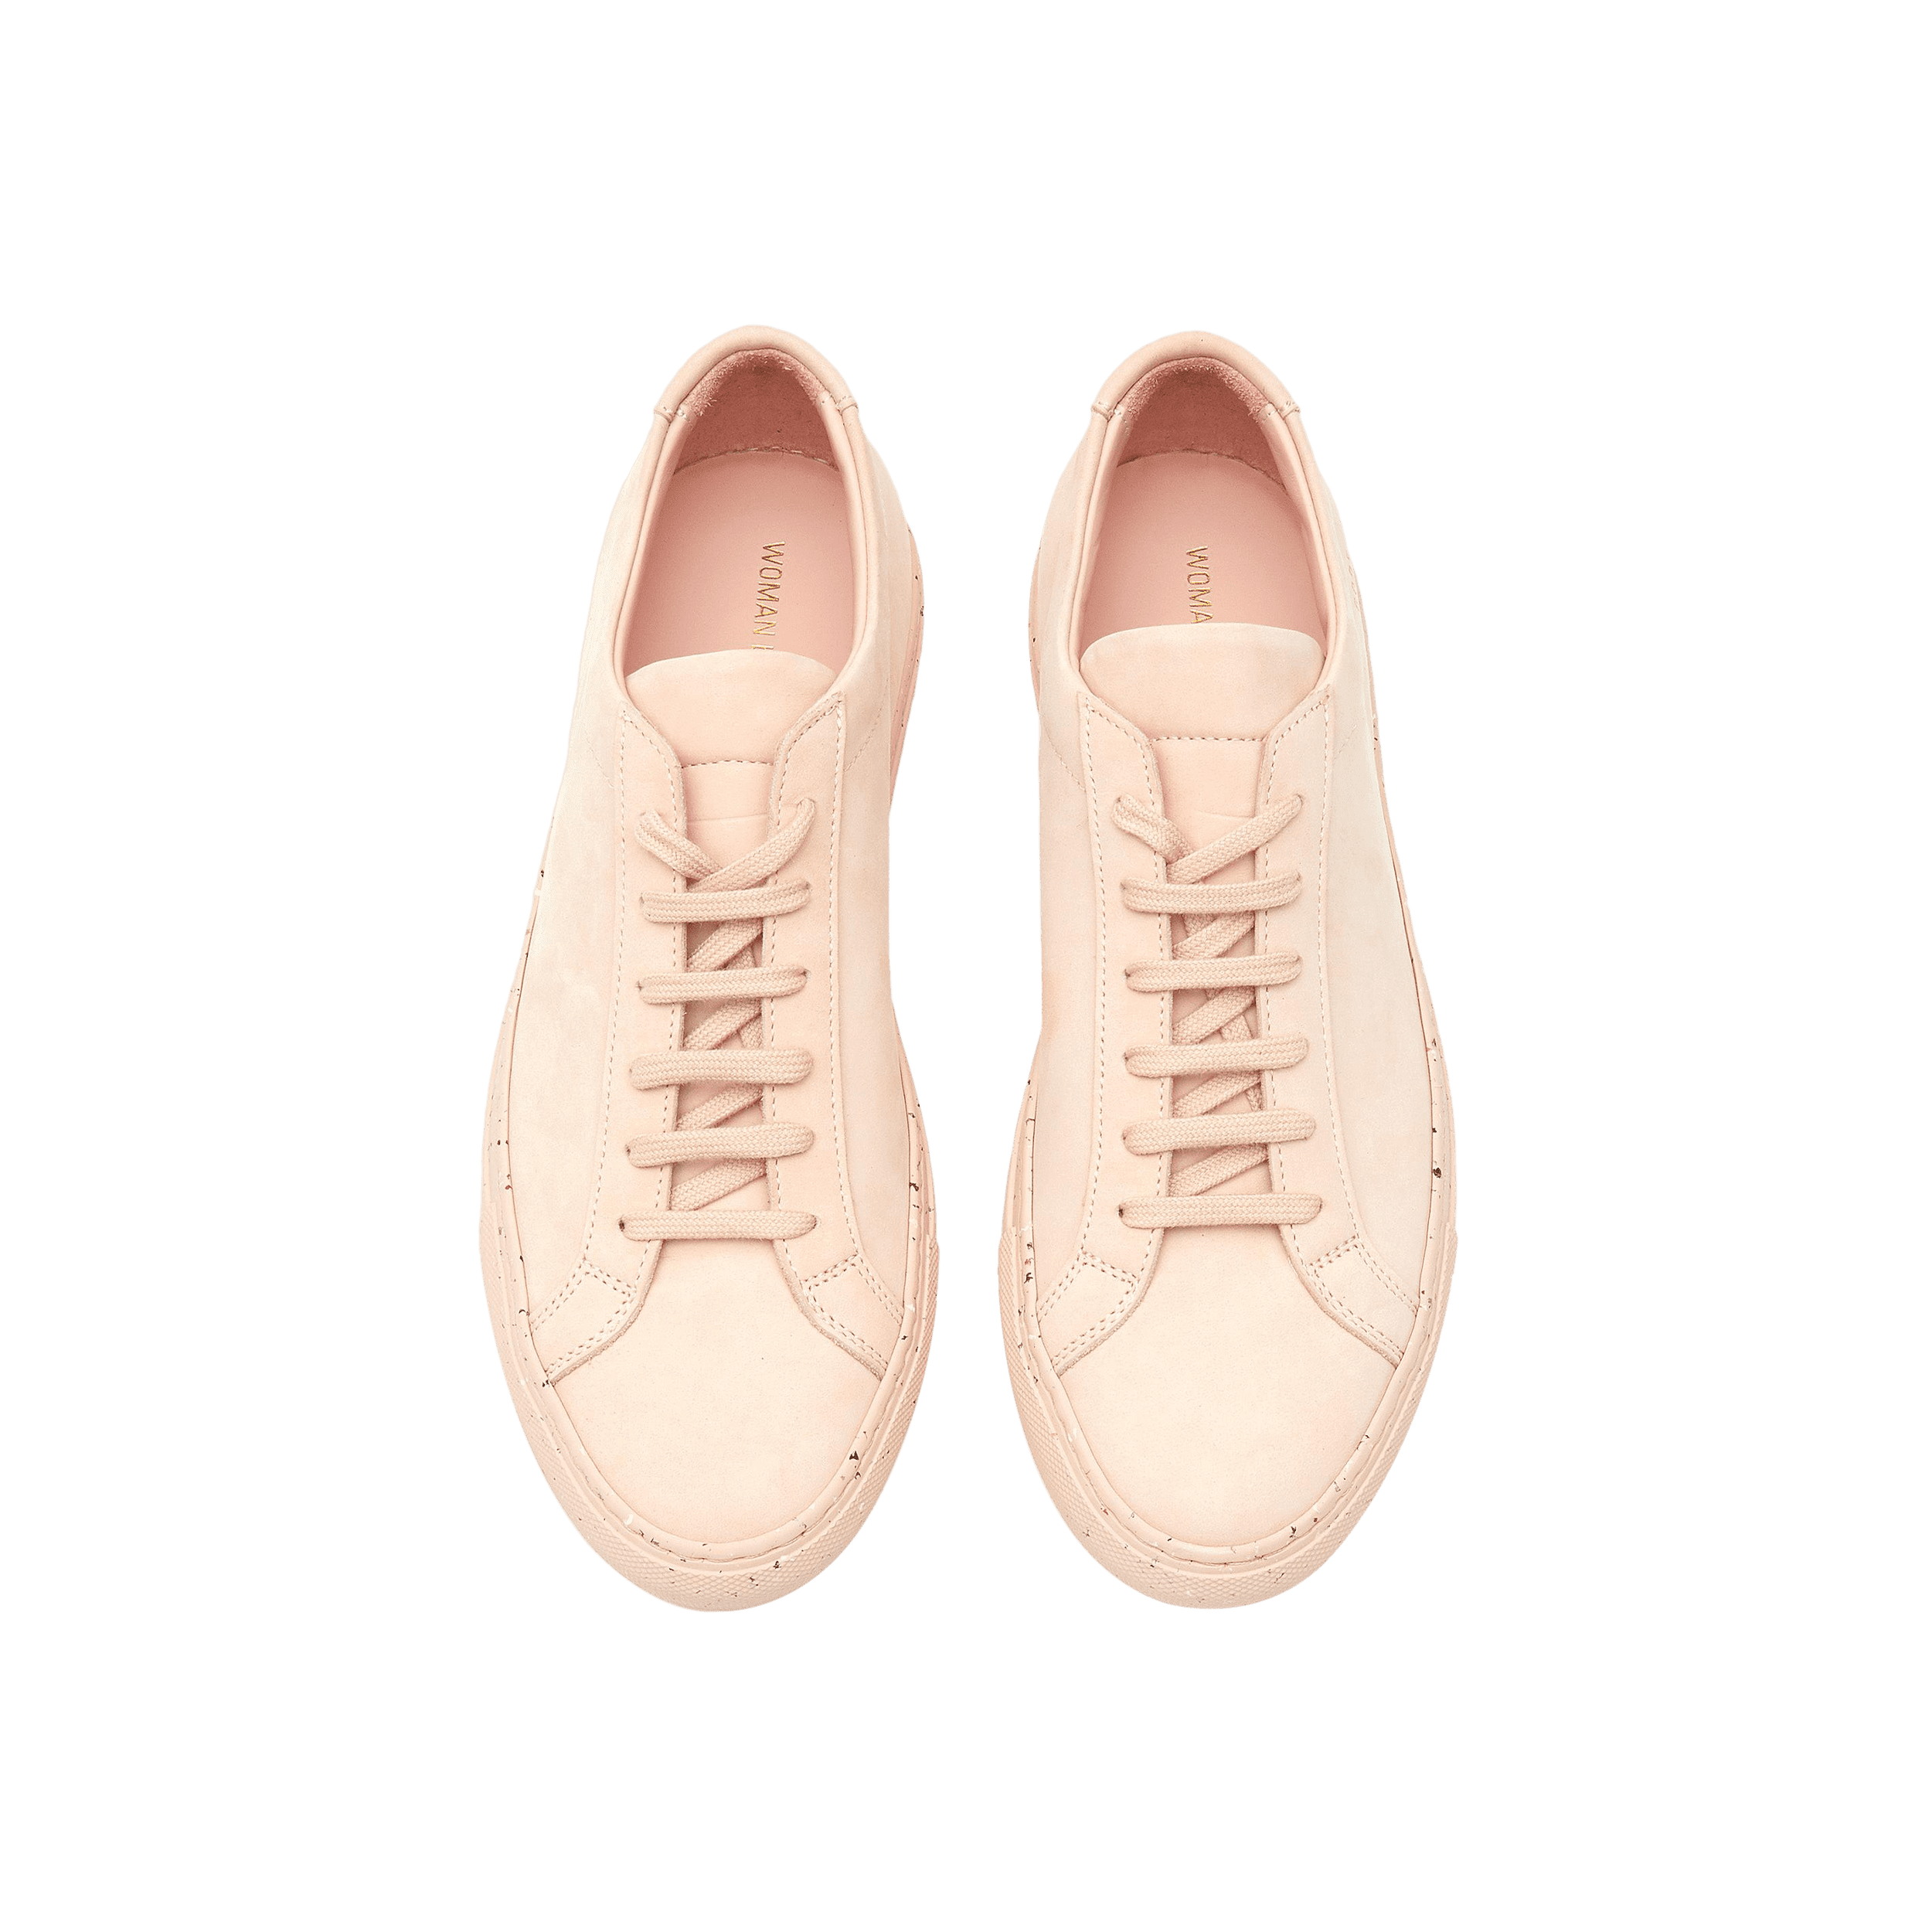 Common Projects - Siwilai